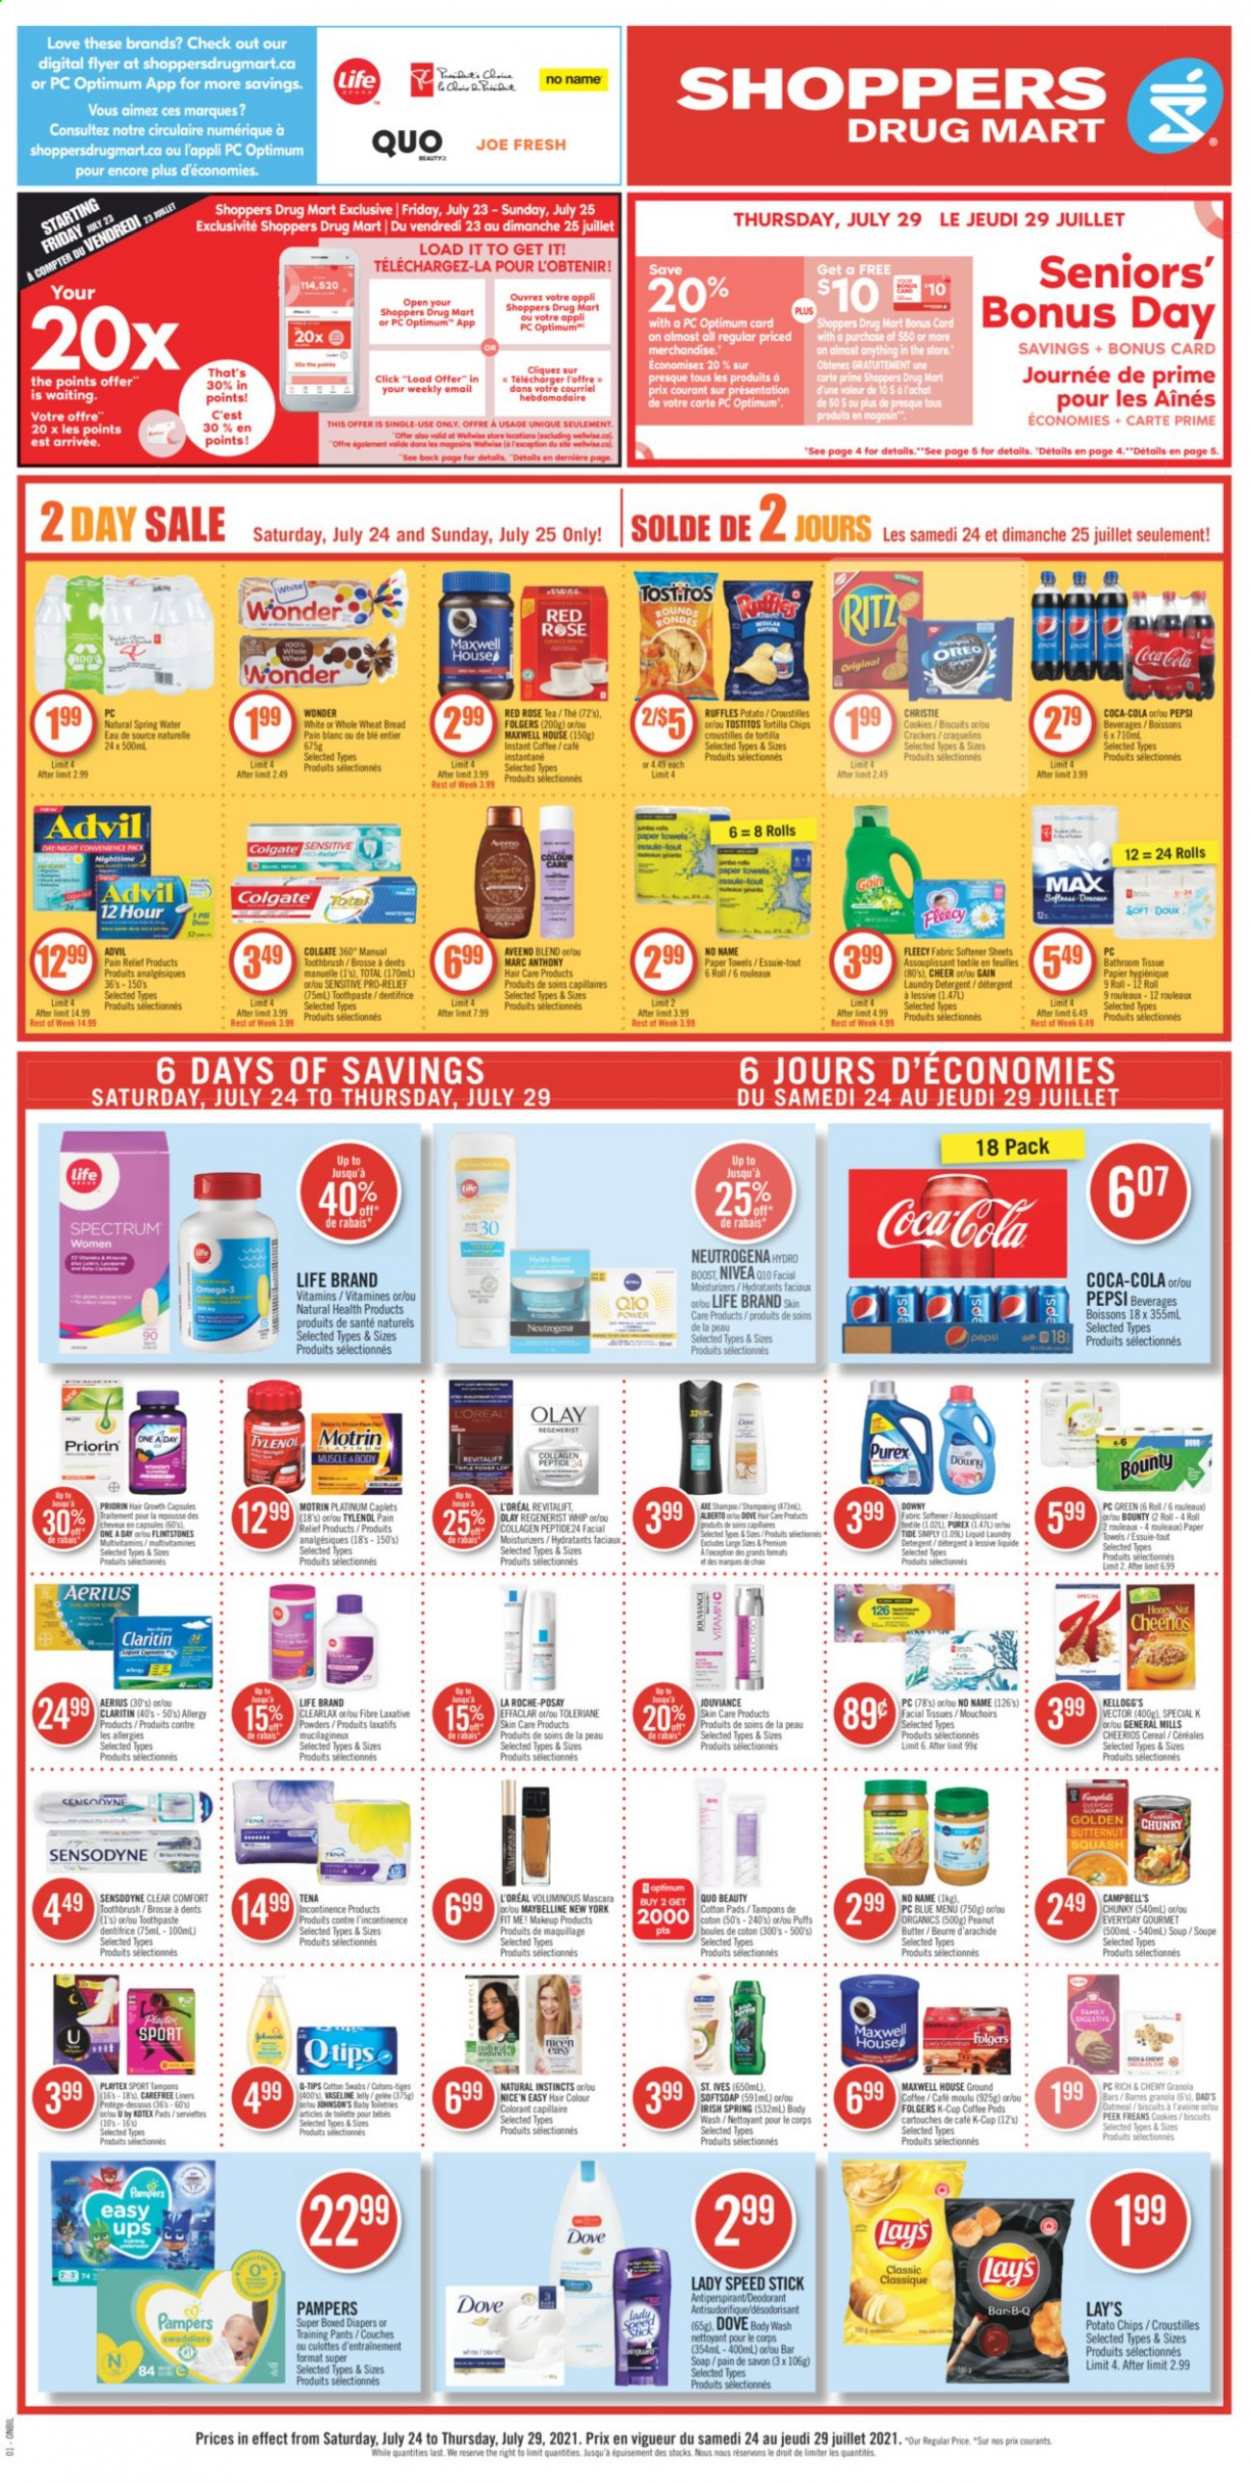 thumbnail - Shoppers Drug Mart Flyer - July 24, 2021 - July 29, 2021 - Sales products - cookies, Bounty, crackers, Kellogg's, biscuit, RITZ, tortilla chips, potato chips, Lay’s, Ruffles, Tostitos, oatmeal, soup, cereals, Cheerios, granola bar, Campbell's, peanut butter, Coca-Cola, Pepsi, spring water, Boost, Maxwell House, tea, coffee pods, instant coffee, Folgers, ground coffee, coffee capsules, K-Cups, pants, nappies, Johnson's, baby pants, Aveeno, bath tissue, kitchen towels, paper towels, Gain, Tide, fabric softener, laundry detergent, Purex, Downy Laundry, body wash, Softsoap, soap bar, soap, toothbrush, toothpaste, Playtex, Carefree, Kotex, Kotex pads, tampons, facial tissues, L’Oréal, La Roche-Posay, moisturizer, Olay, hair color, anti-perspirant, Speed Stick, makeup, Tylenol, Advil Rapid, Spectrum, laxative, Motrin, Oreo, mascara, Maybelline, Neutrogena, Pampers, Nivea, chips, Sensodyne, deodorant. Page 1.